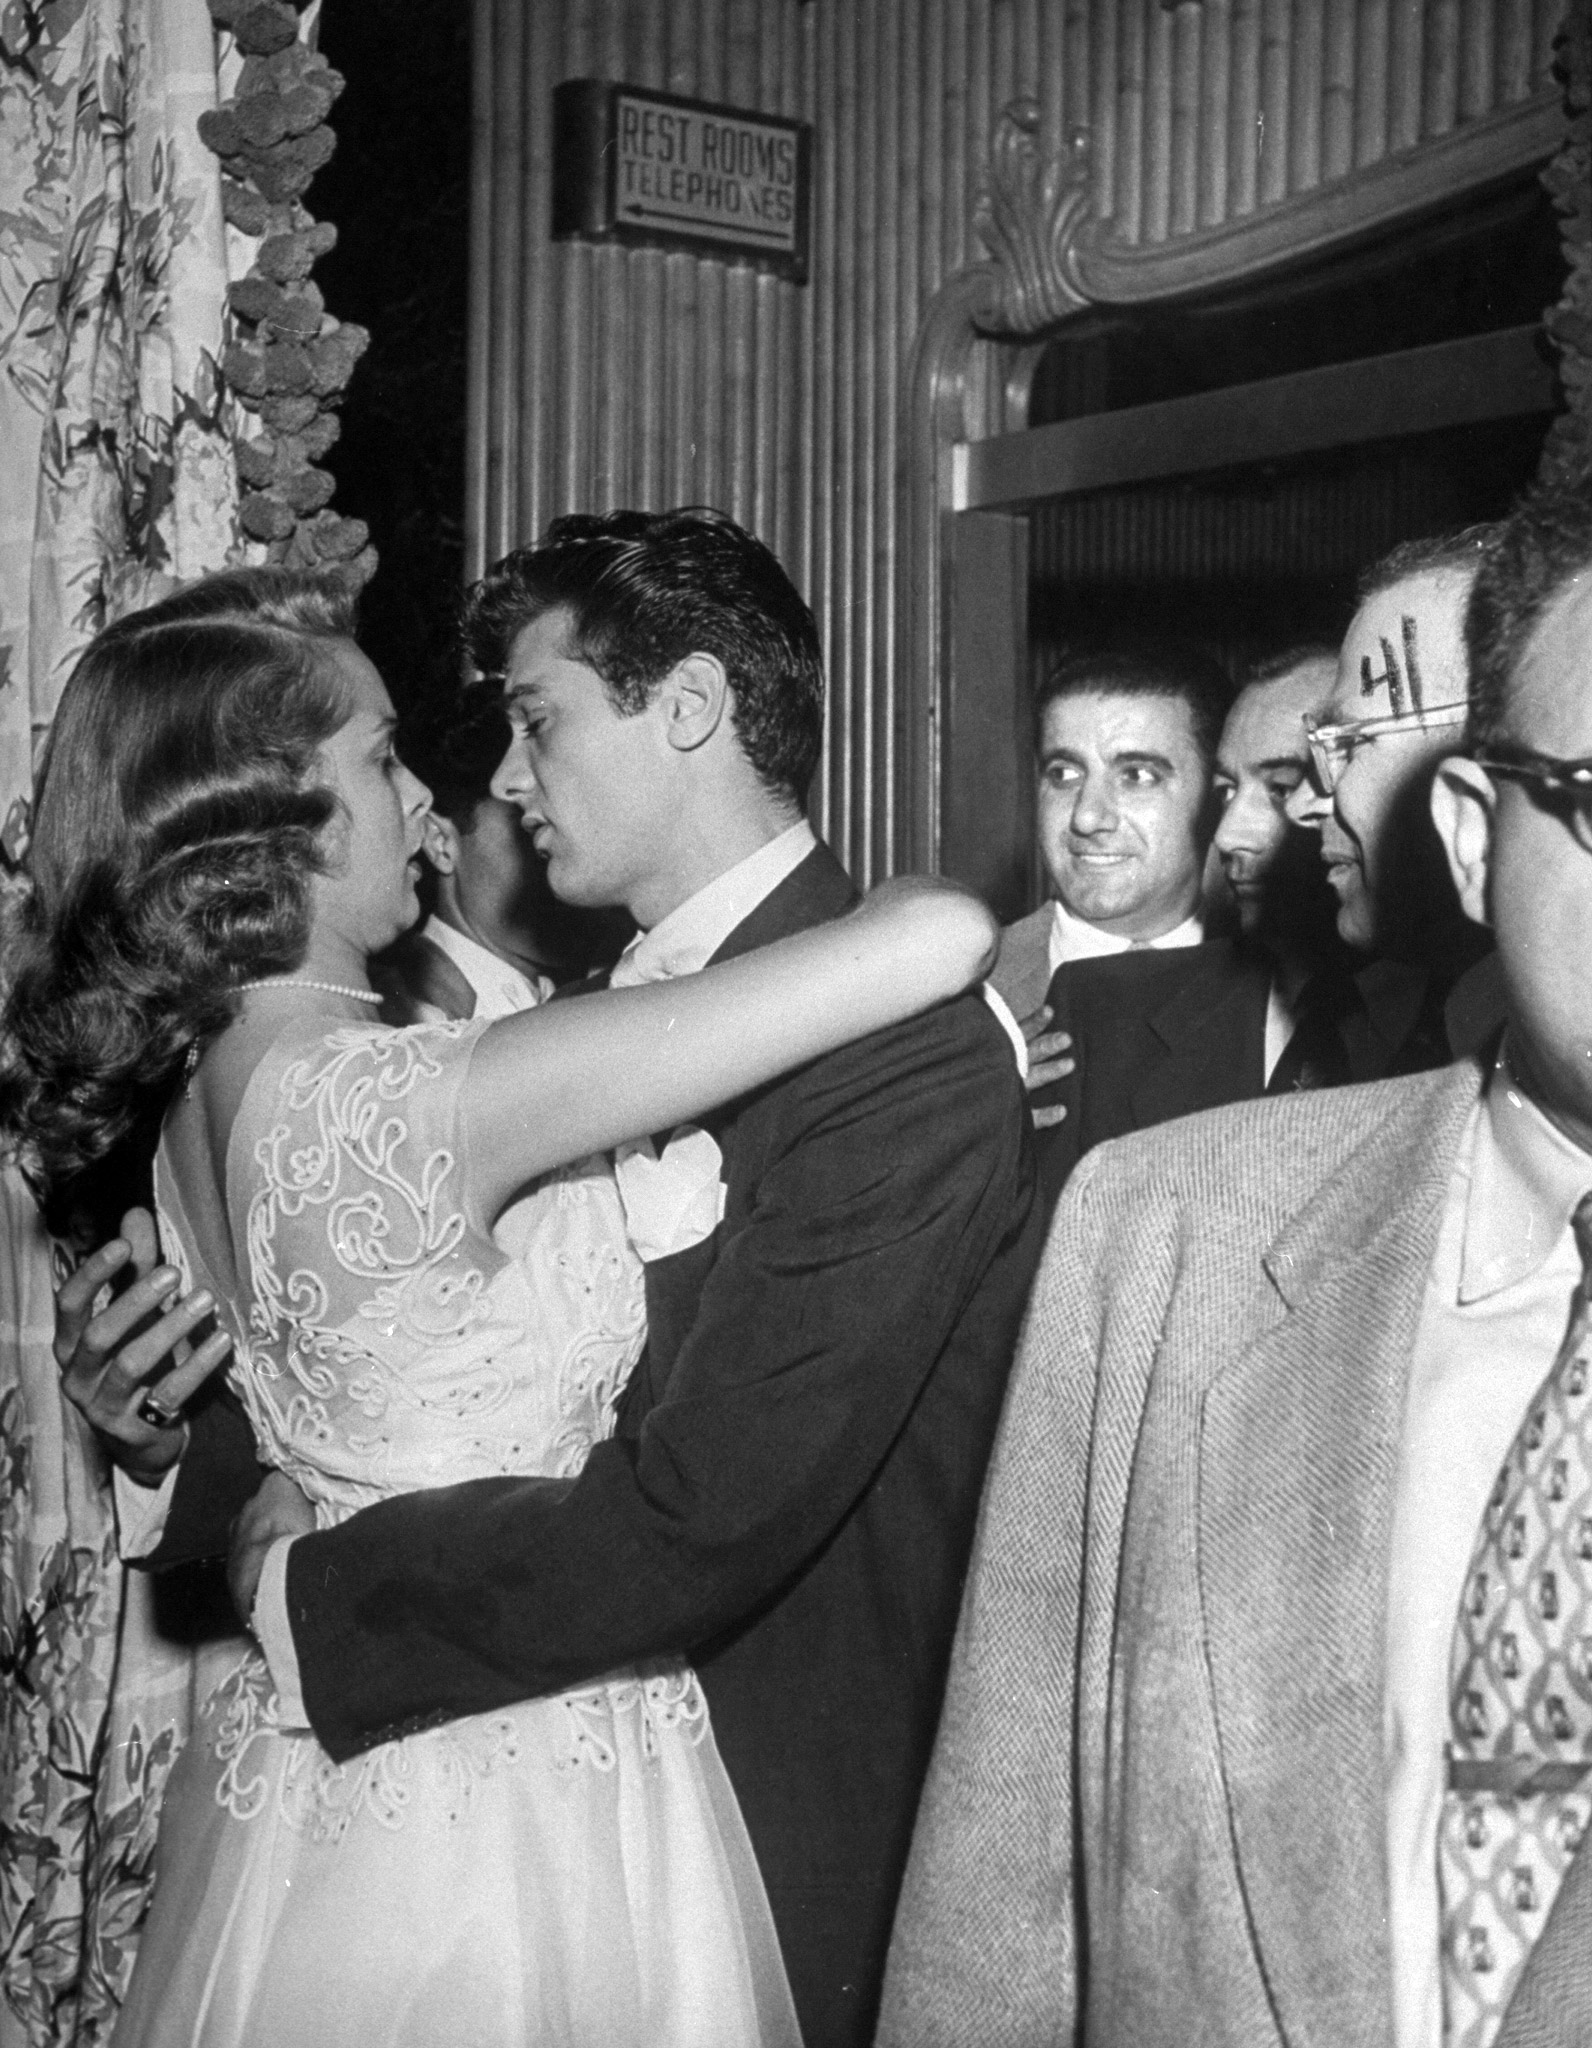 Janet Leigh and Tony Curtis embracing at party celebrating their marriage, 1951.